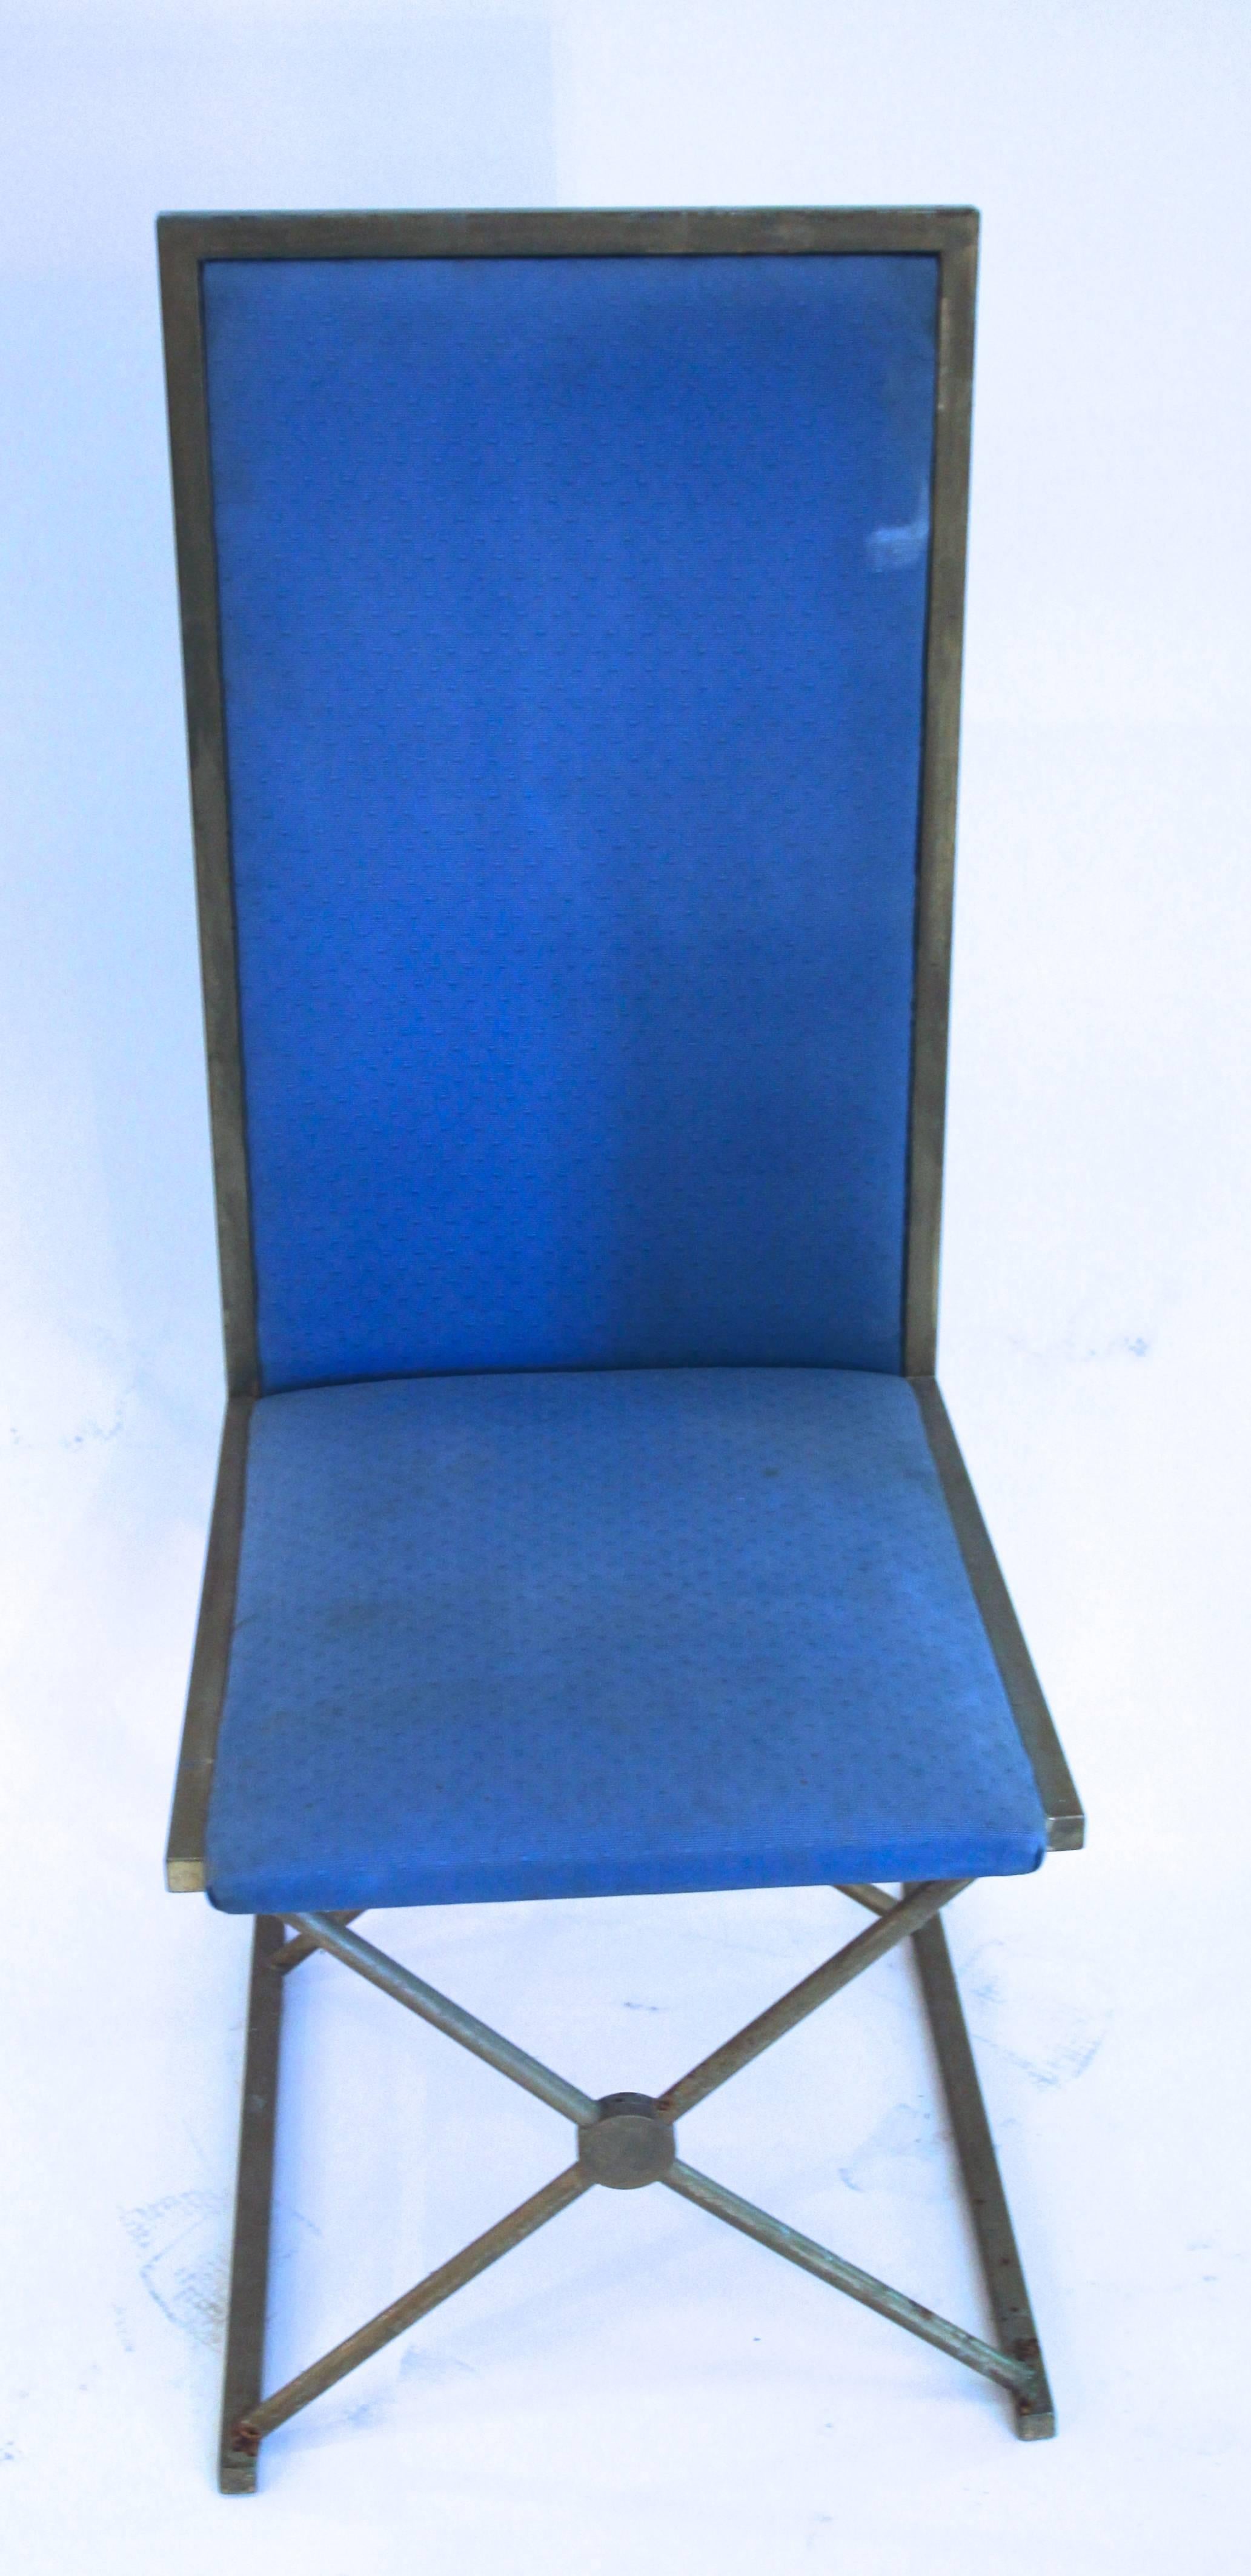 suite of six chairs,
Original blue textile and gilded brass,
circa 1970, France.
Measures: Height 105 cm, seat height 42 cm,
Width 43 cm, depth 45 cm.